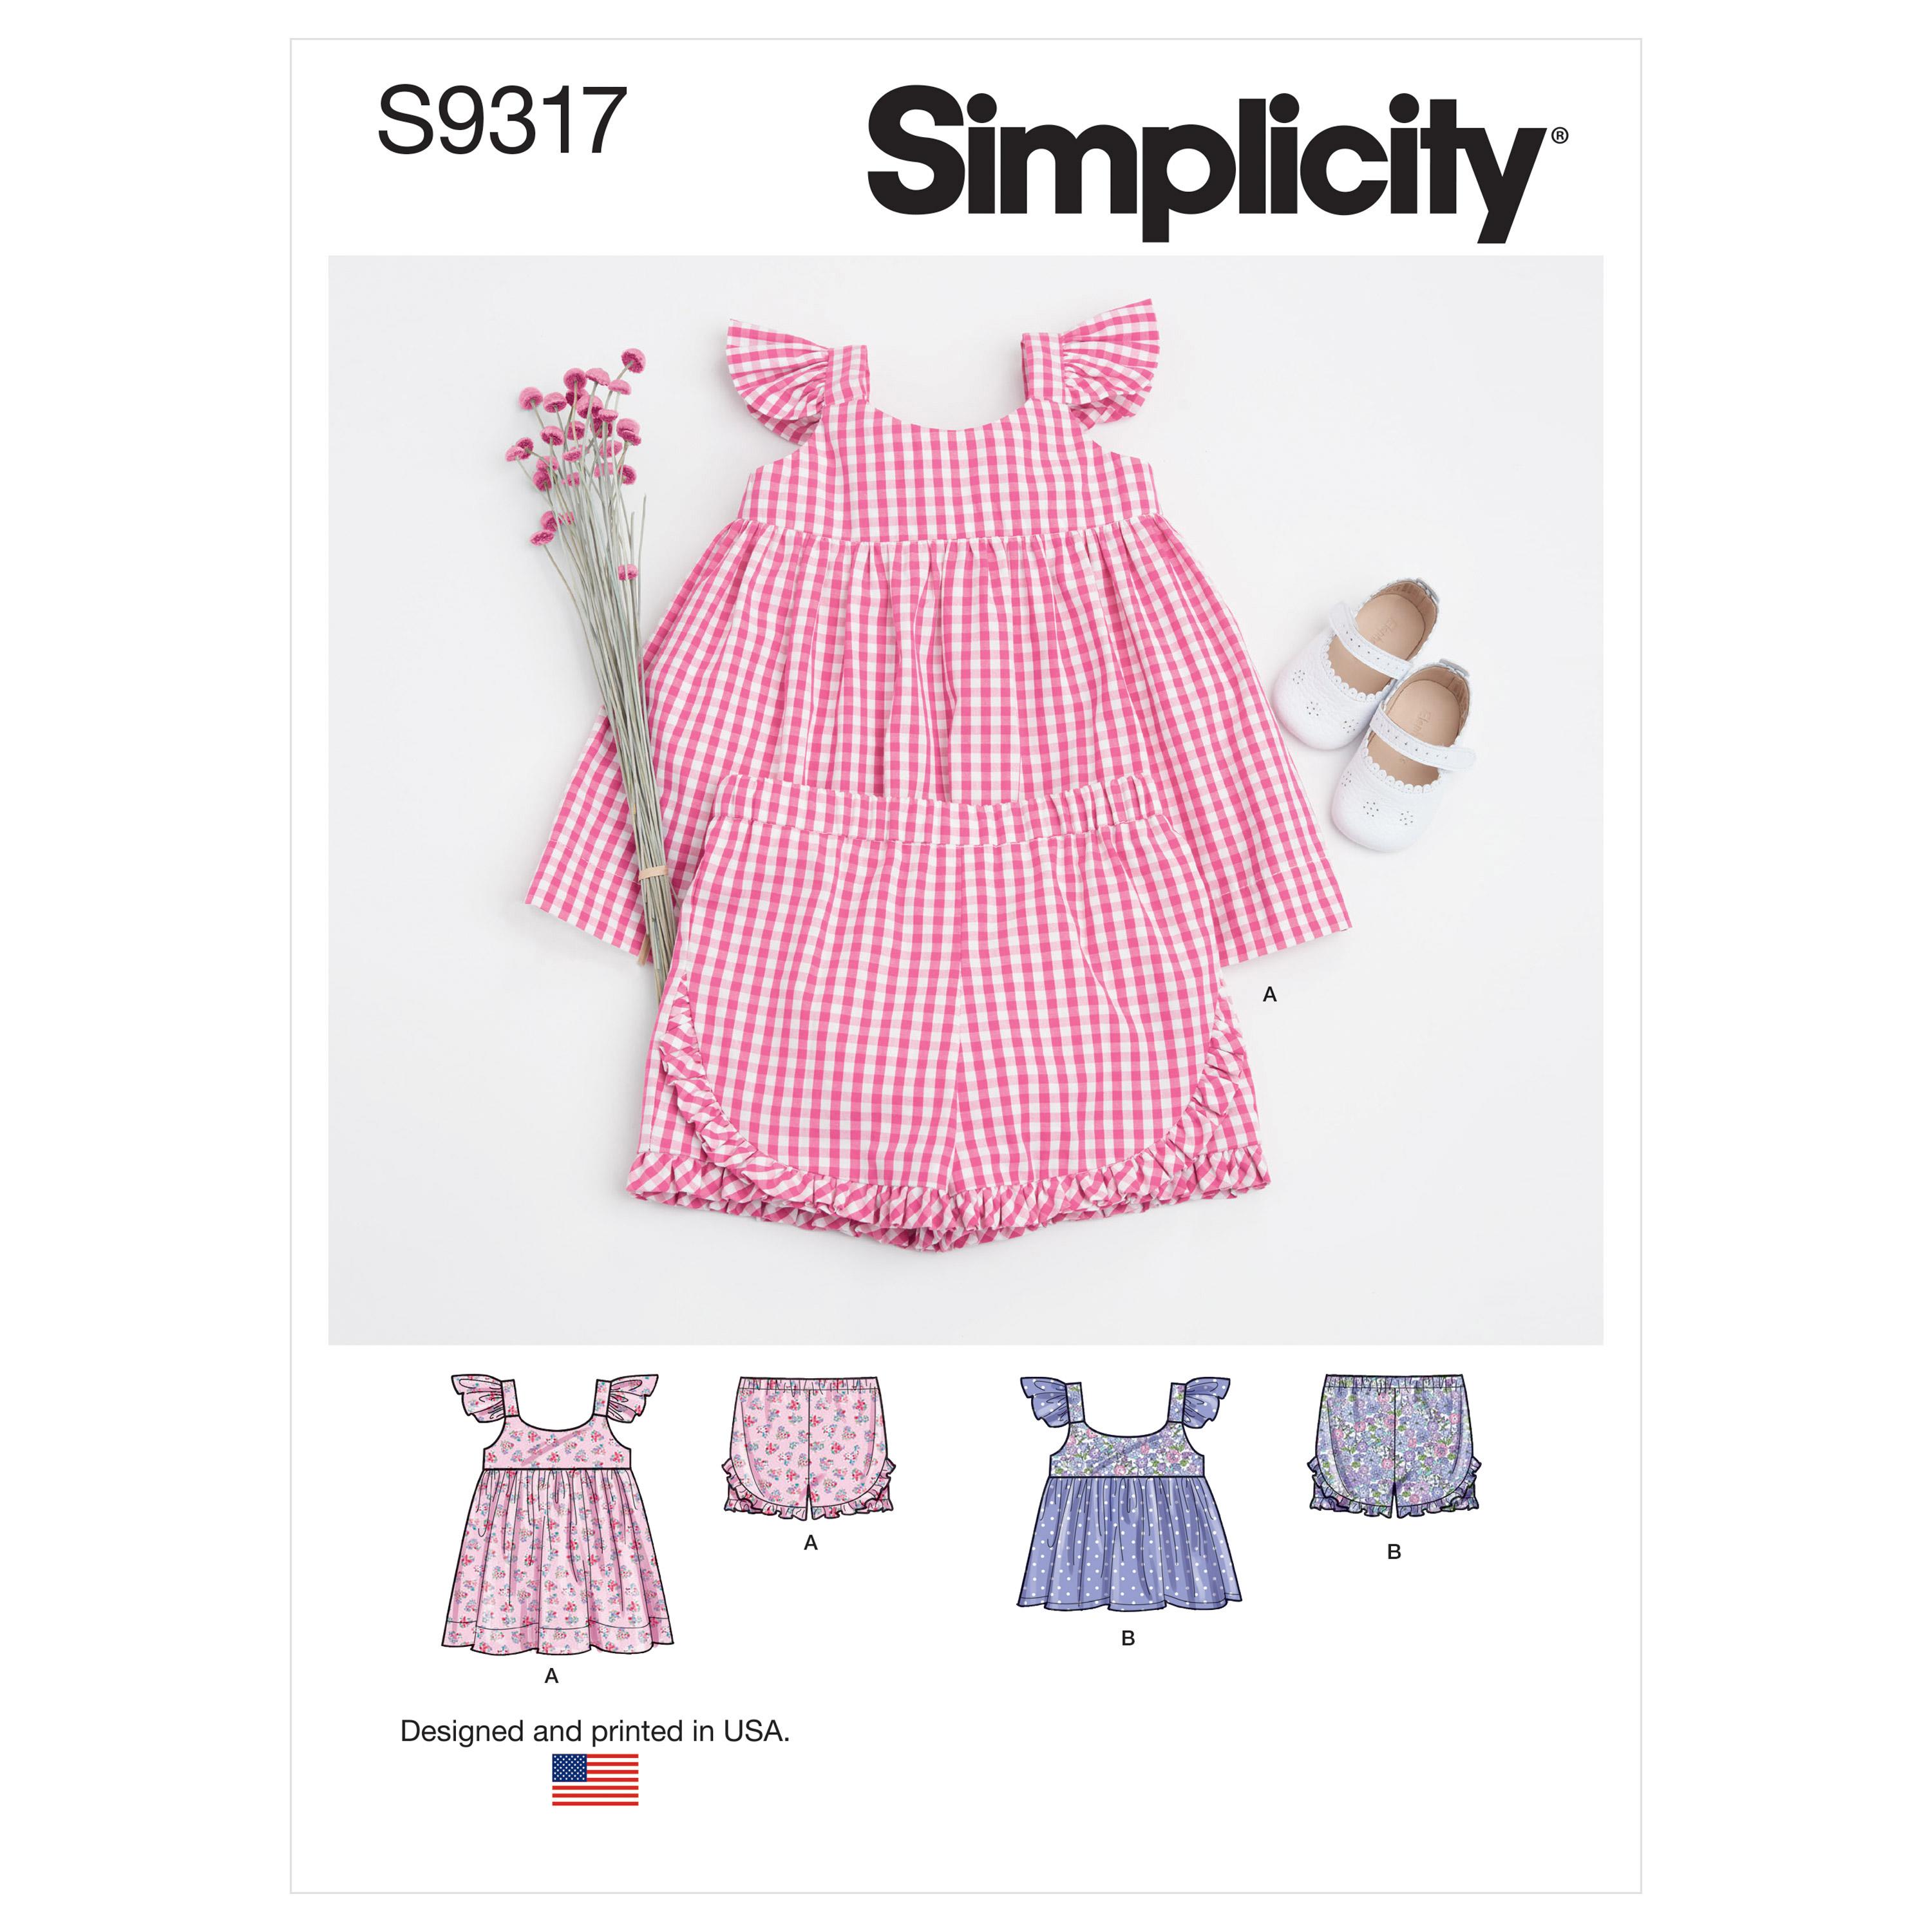 Simplicity Sewing Pattern S9317 Babies' Dress, Top and Shorts